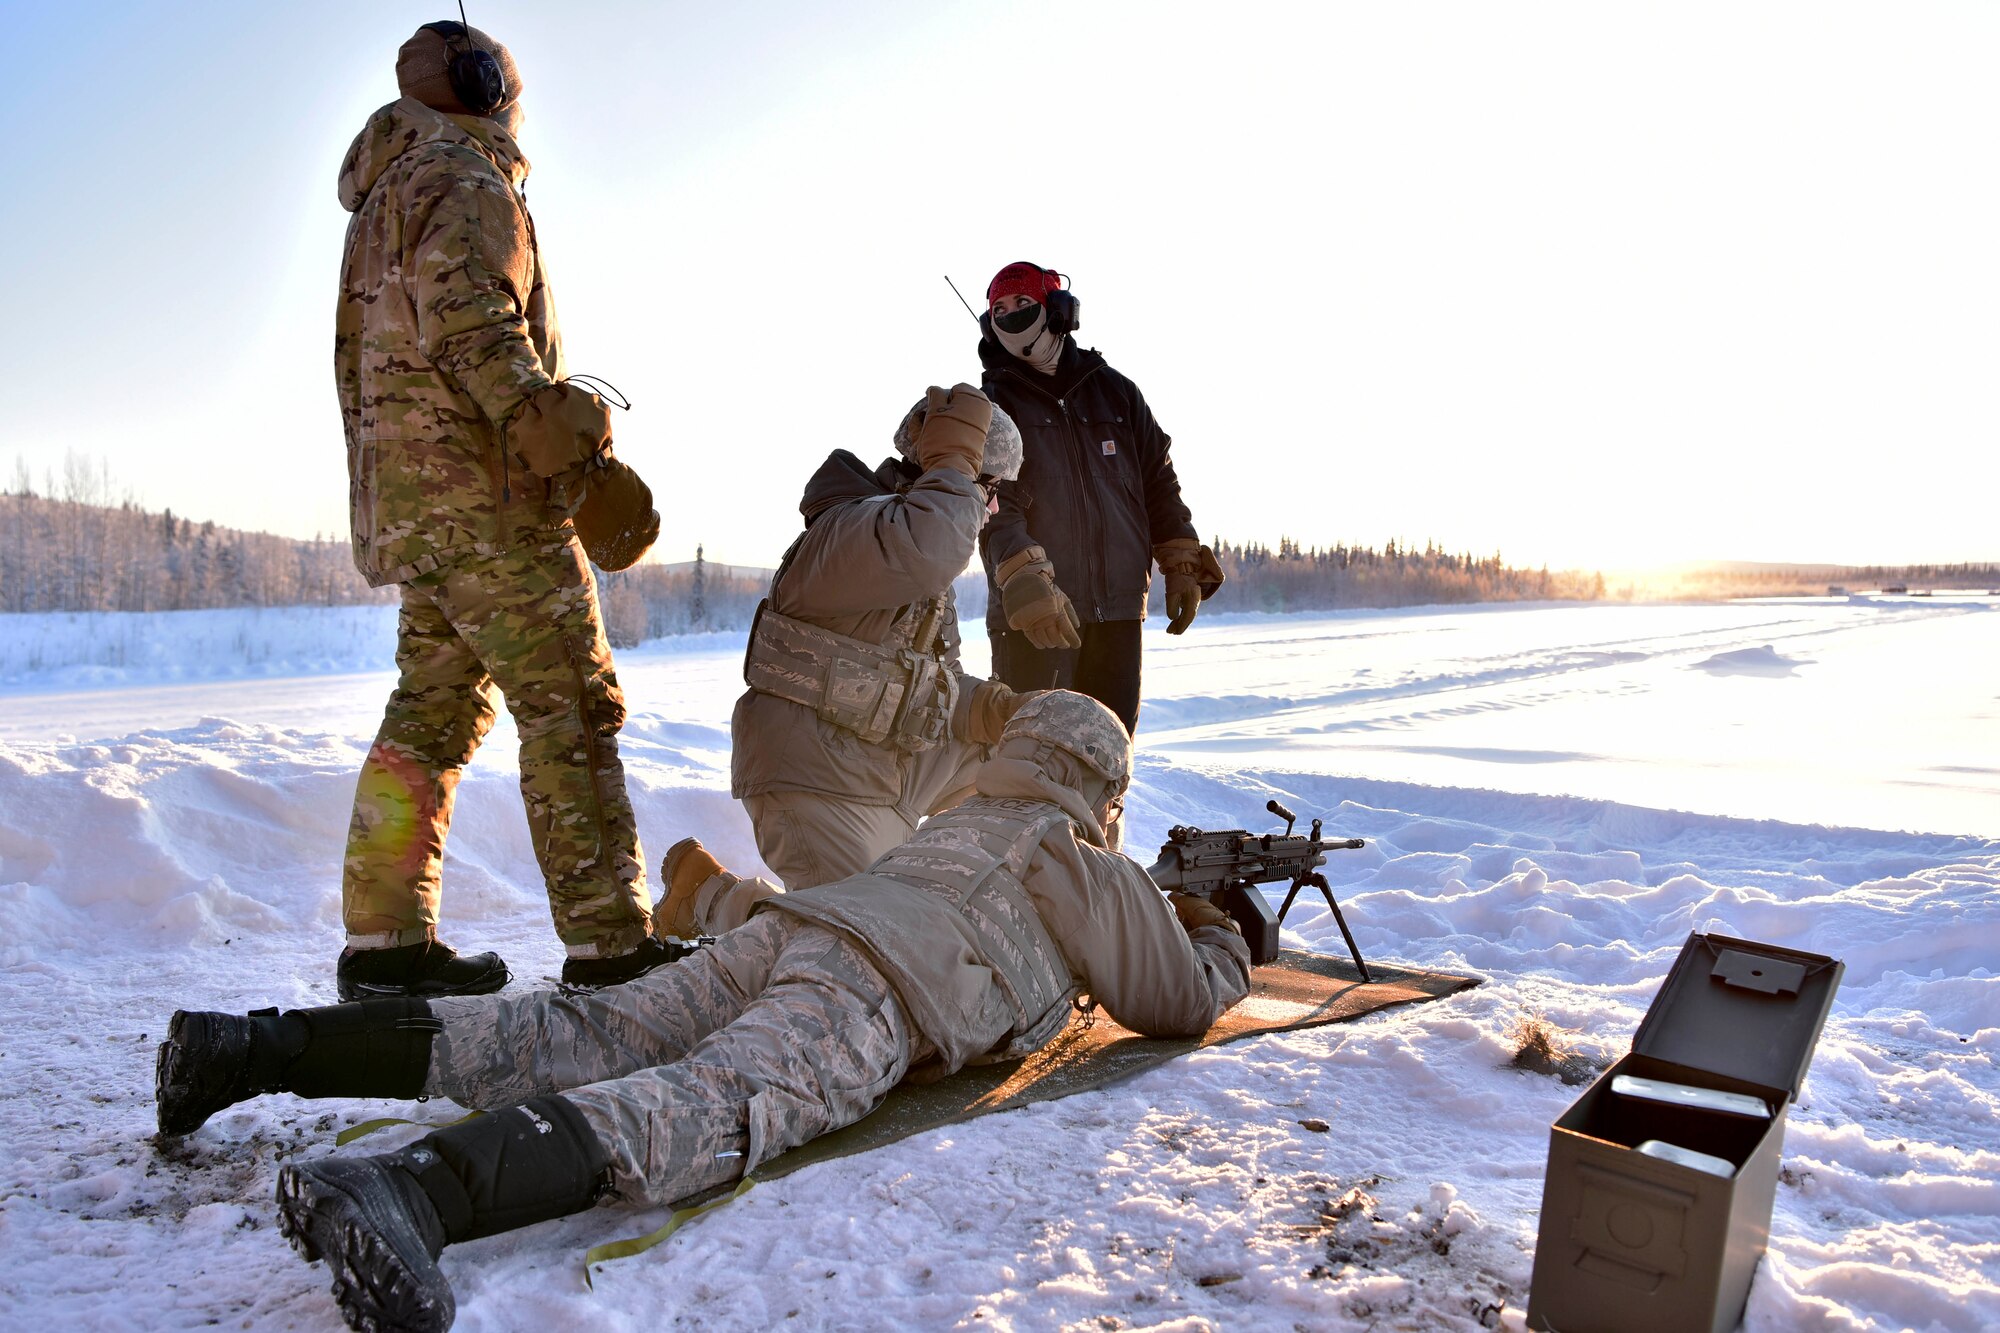 354th Security Forces Squadron Combat Arms Training and Maintenance instructors prepare Airmen to fire an M-249 Squad Automatic Weapon at Eielson Air Force Base, Alaska, Jan. 9, 2020. CATM instructors are responsible for training the 354th Fighter Wing how to use various small arms weapon systems. (U.S. Air Force photo by Senior Airman Beaux Hebert)